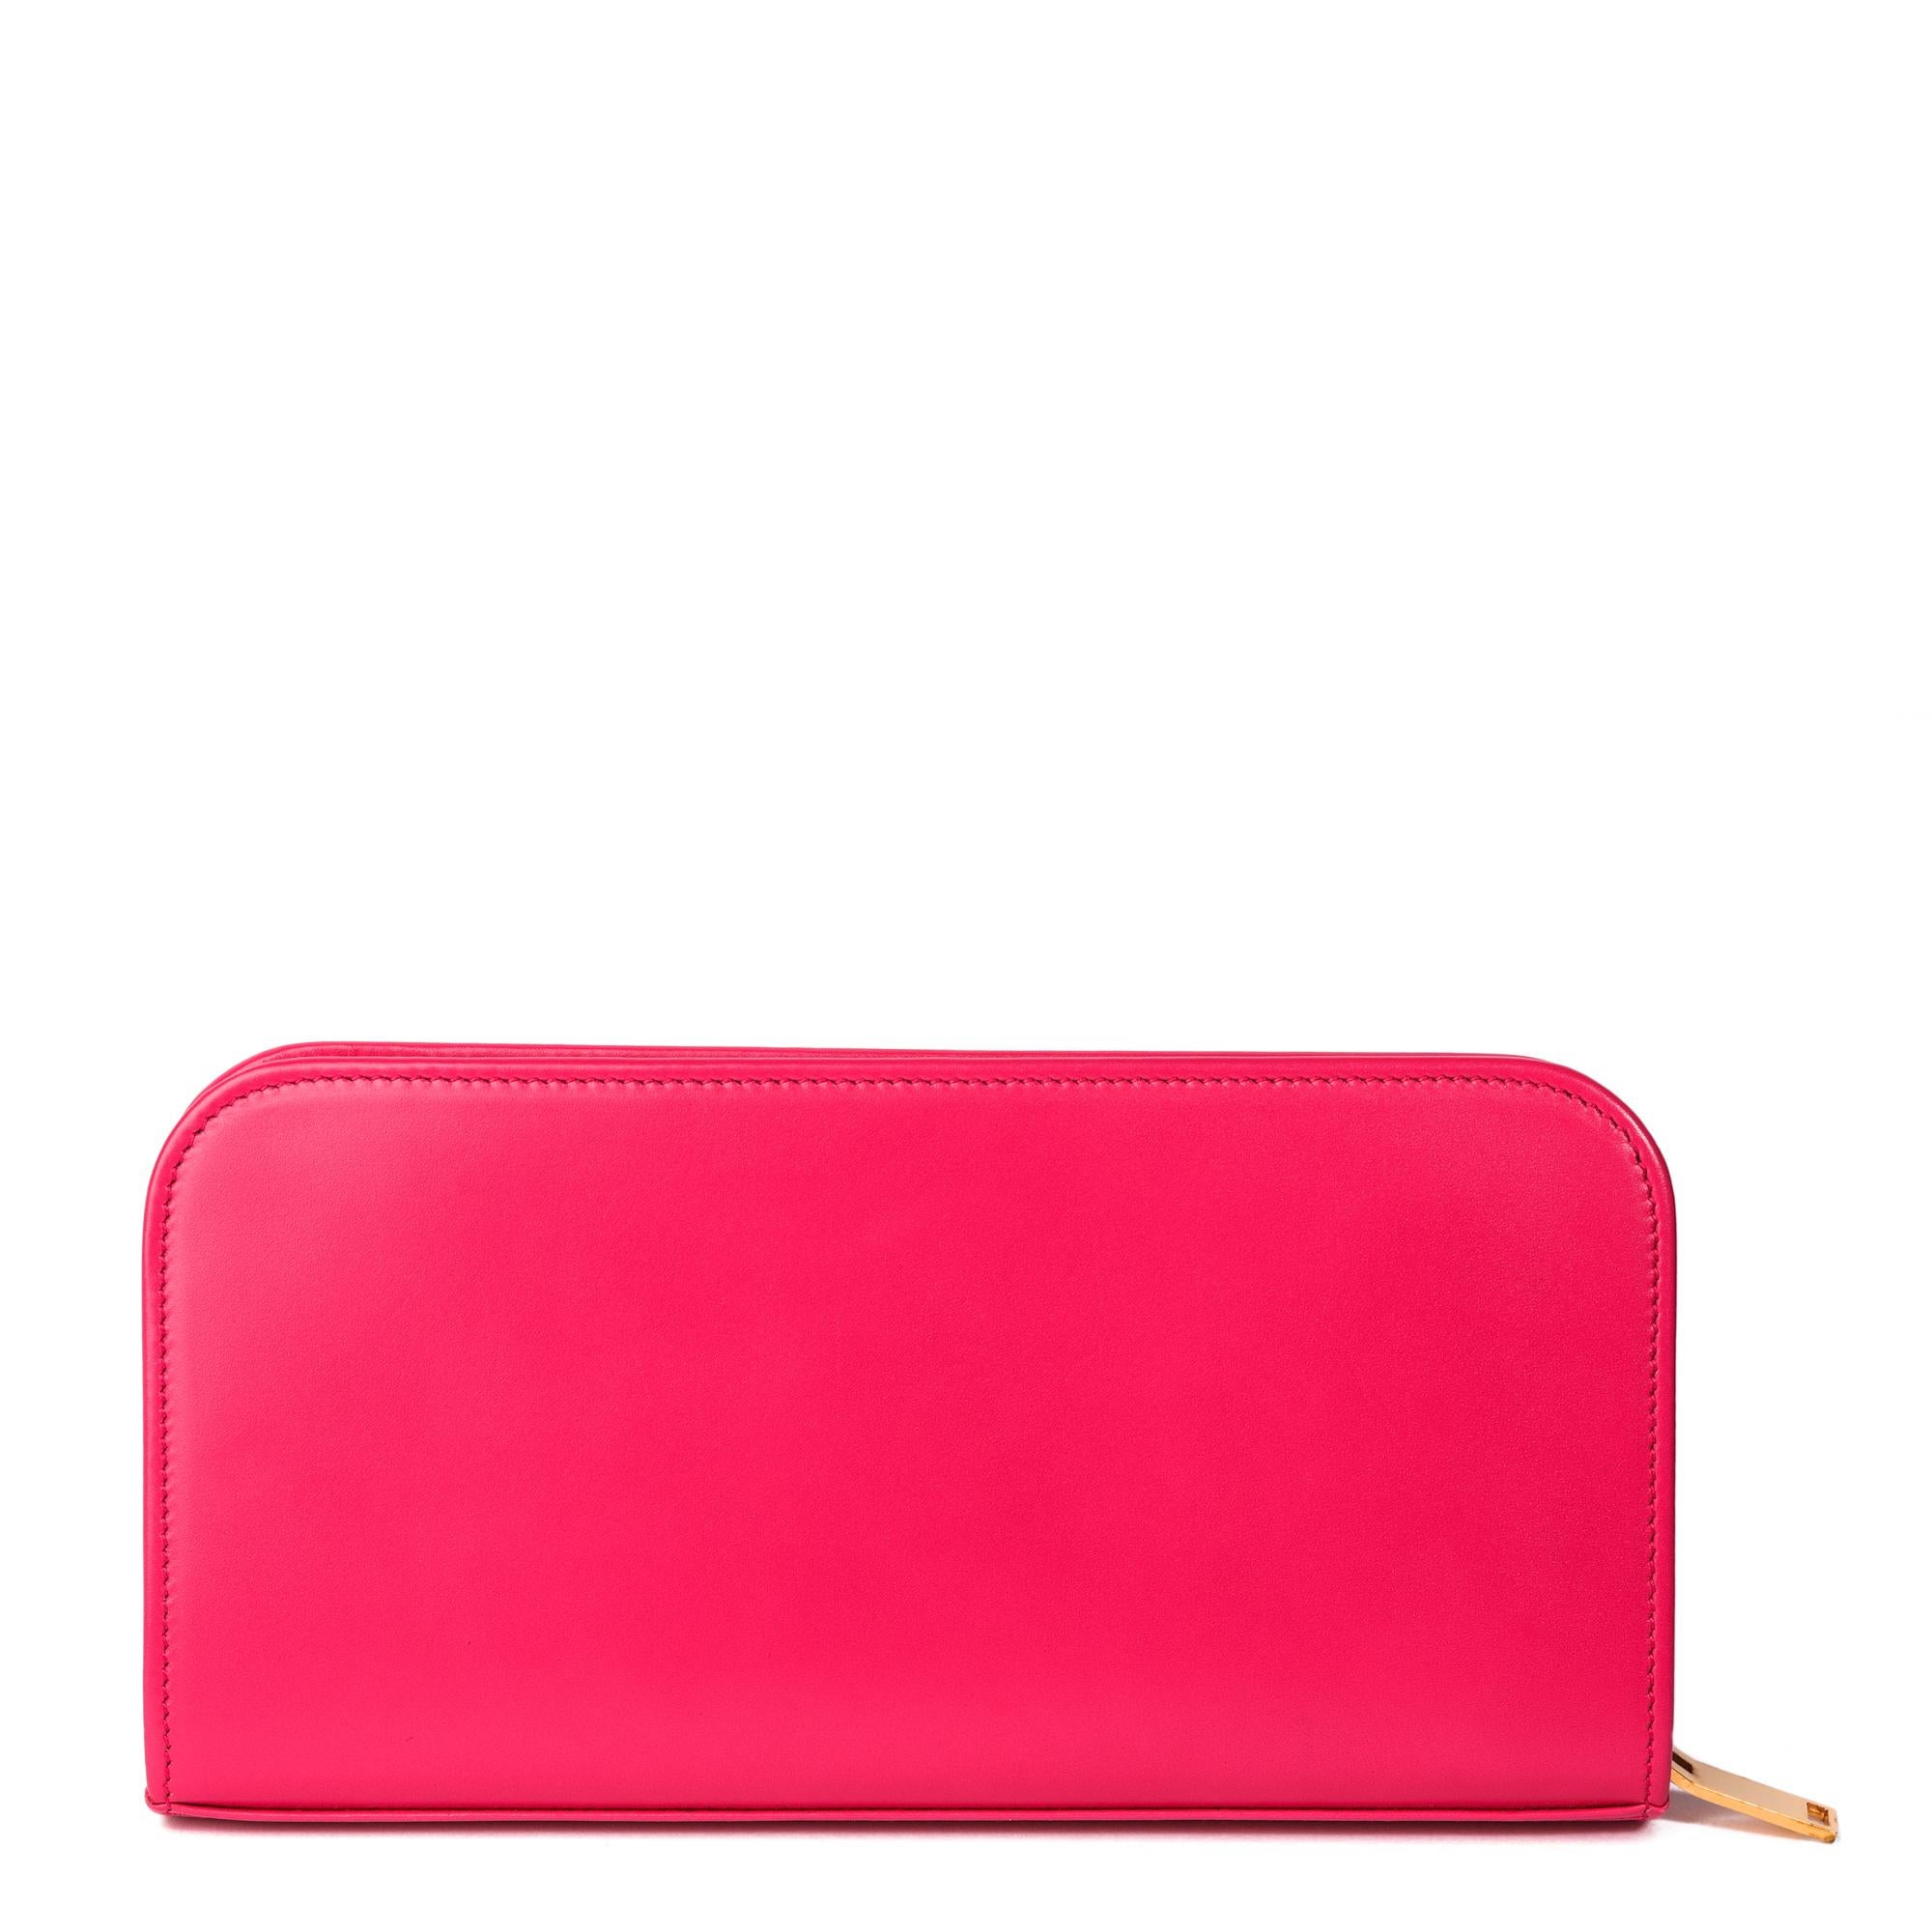 Saint Laurent Pink Grain De Poudre Zip Around Wallet

CONDITION NOTES
The exterior is excellent condition with light signs of use.
The interior is in excellent condition with light signs of use.
The hardware is in excellent condition with light